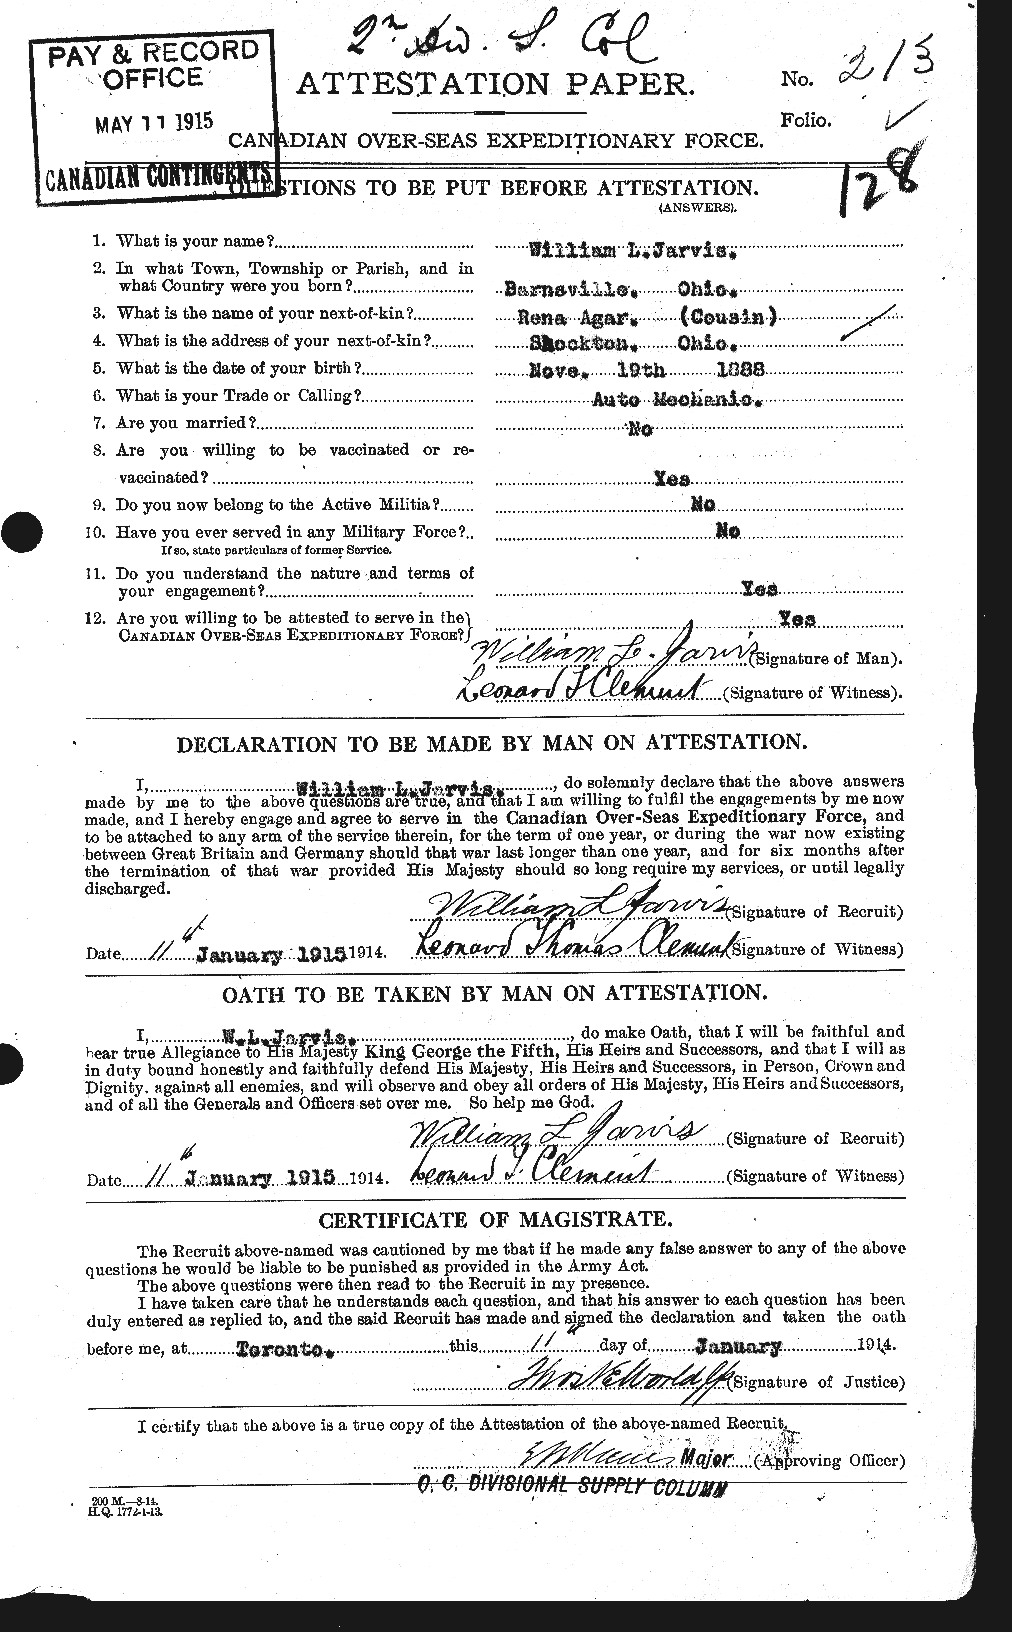 Personnel Records of the First World War - CEF 415891a